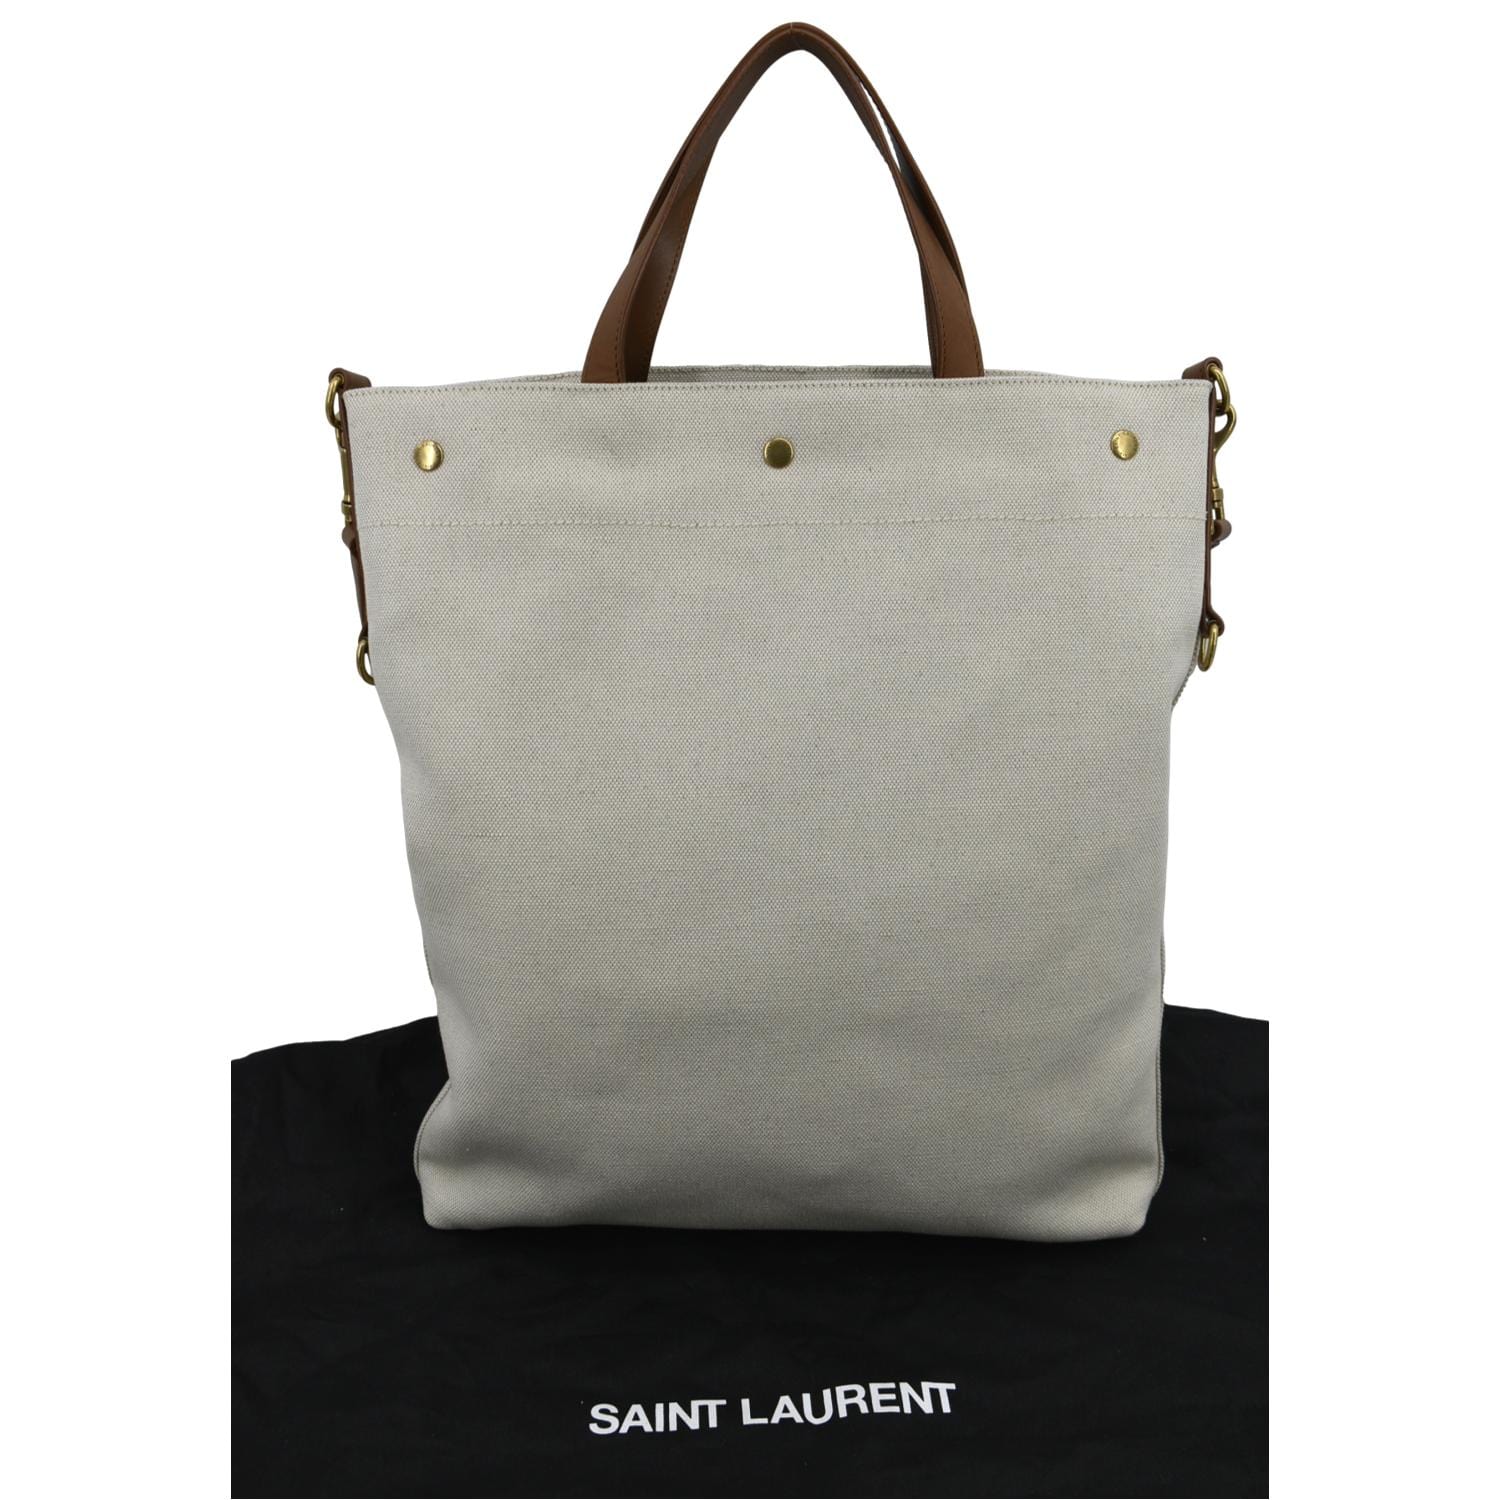 YVES SAINT LAURENT Leather Shopping Tote Bag Beige - 20% OFF